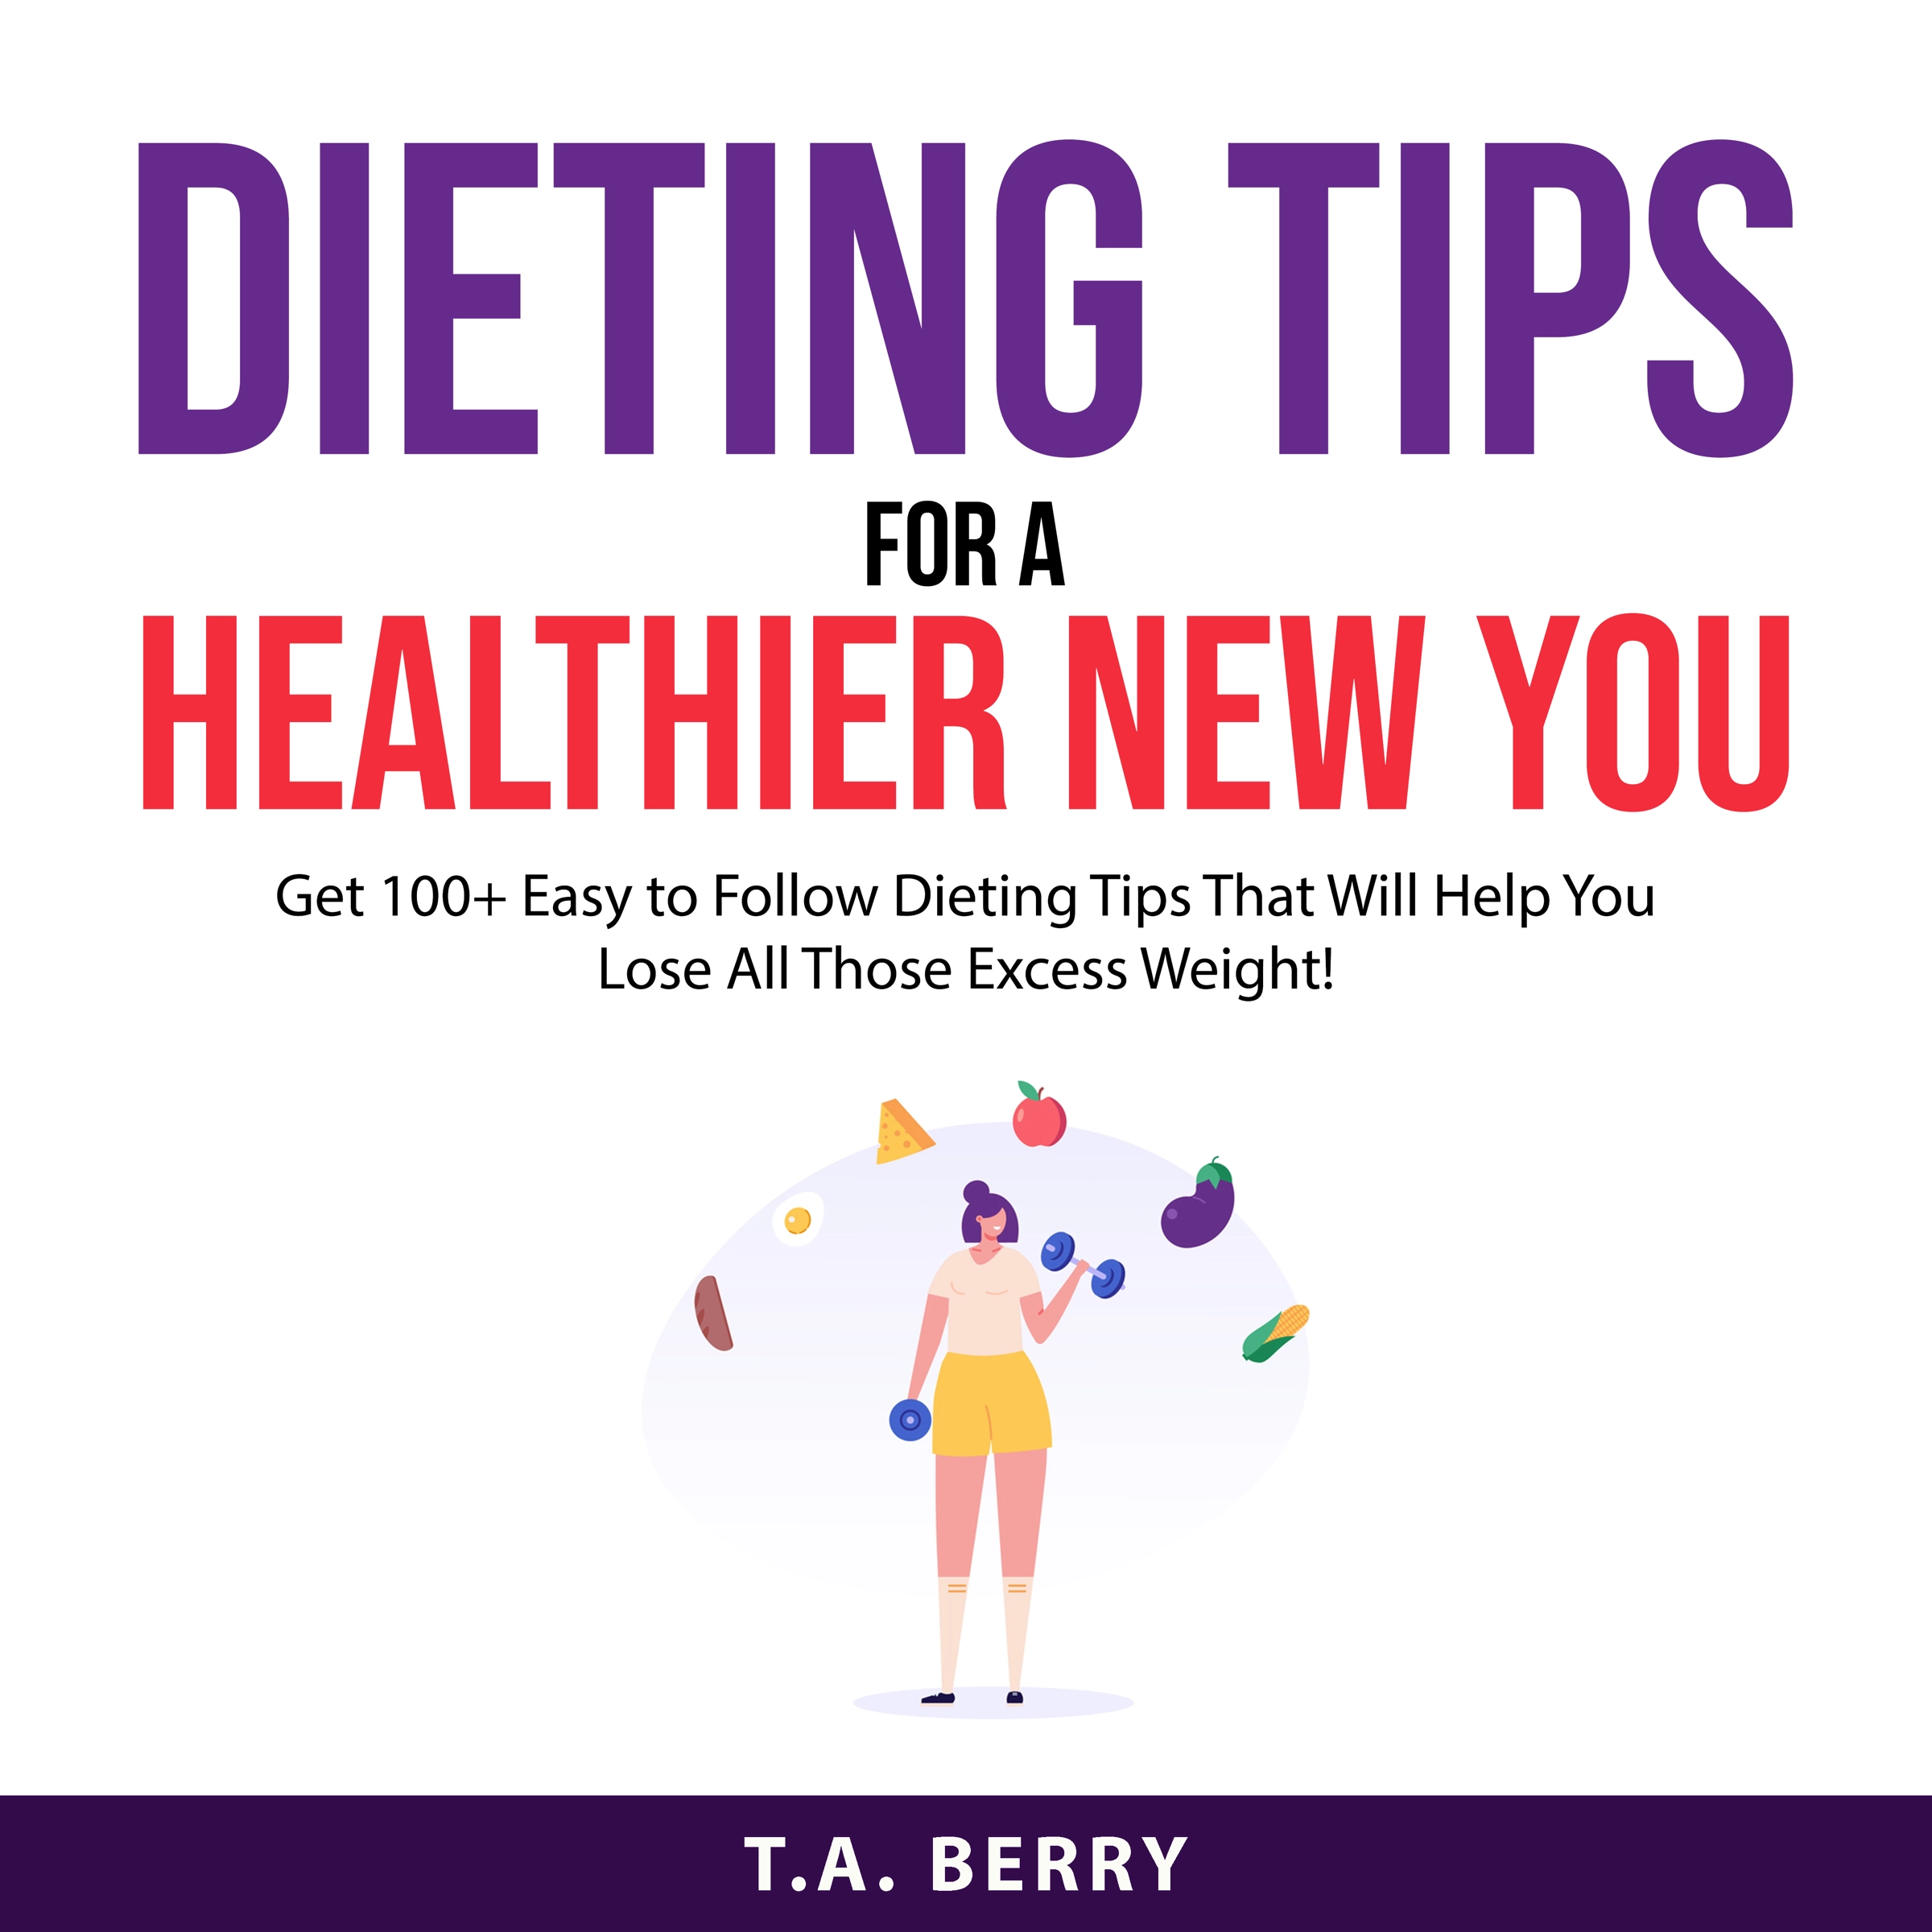 Dieting Tips For A Healthier New You Audiobook by T.A. Berry